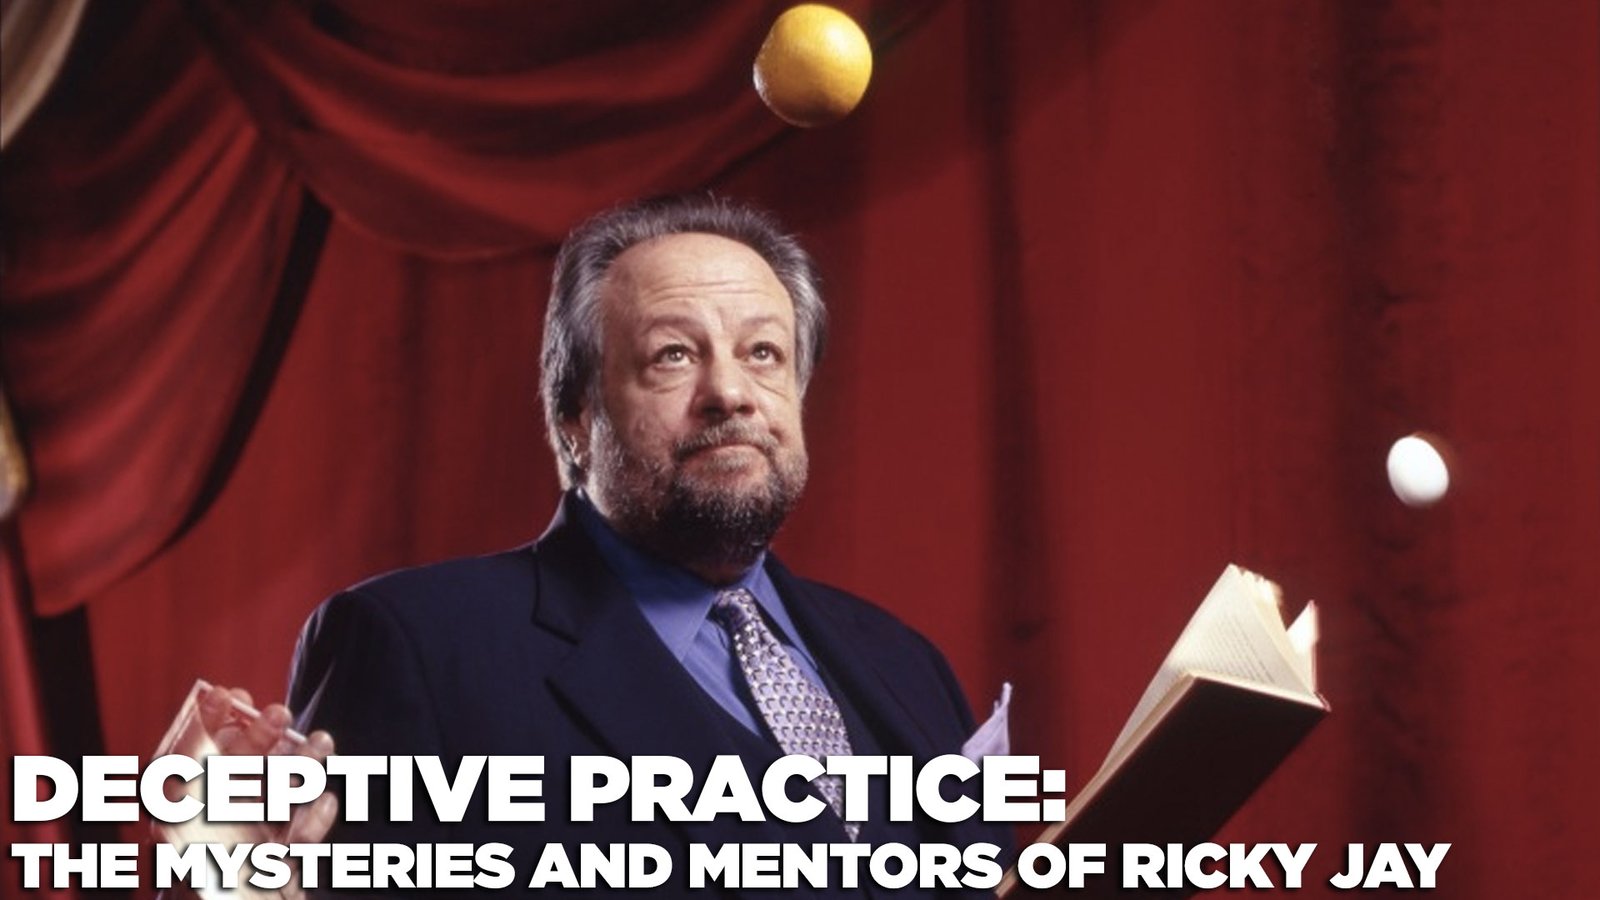 Deceptive Practice - The Mysteries And Mentors Of Ricky Jay